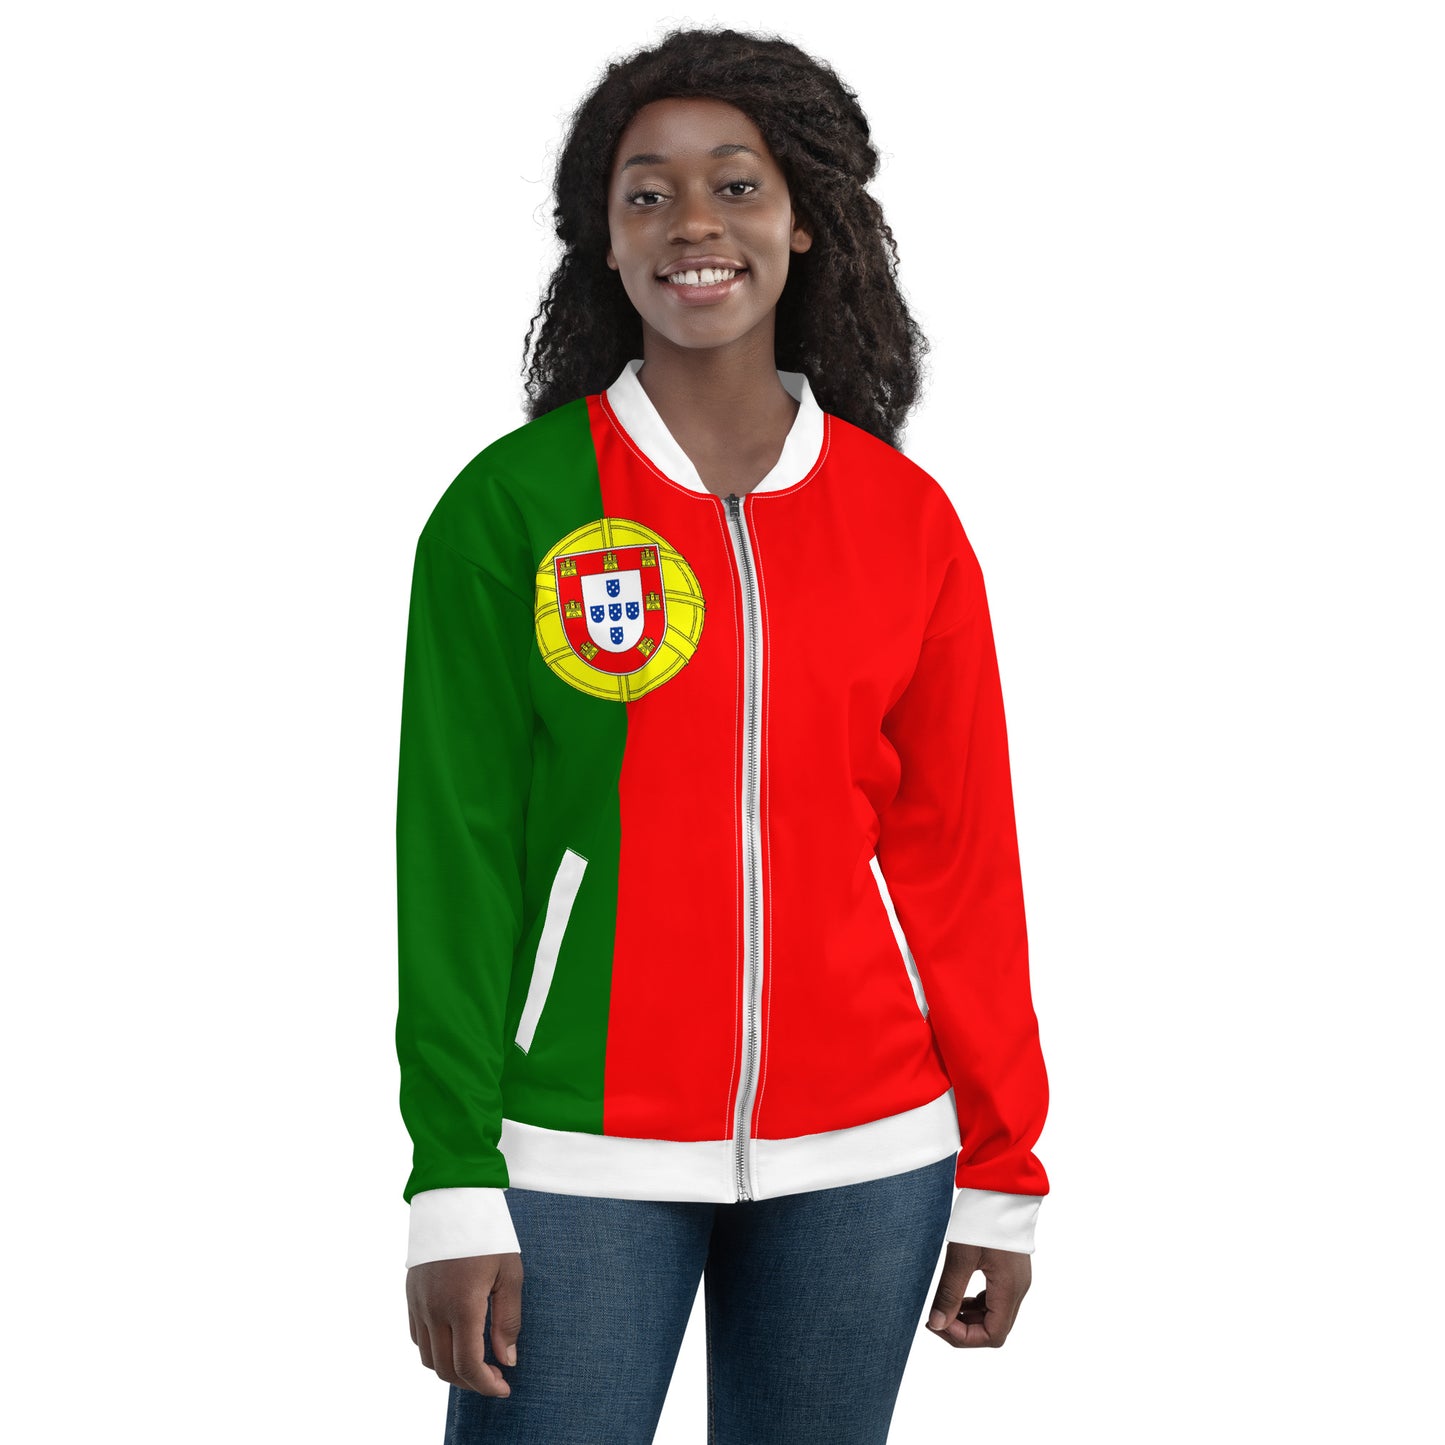 Portugal Soccer Fan Gear: Essential for Every Match